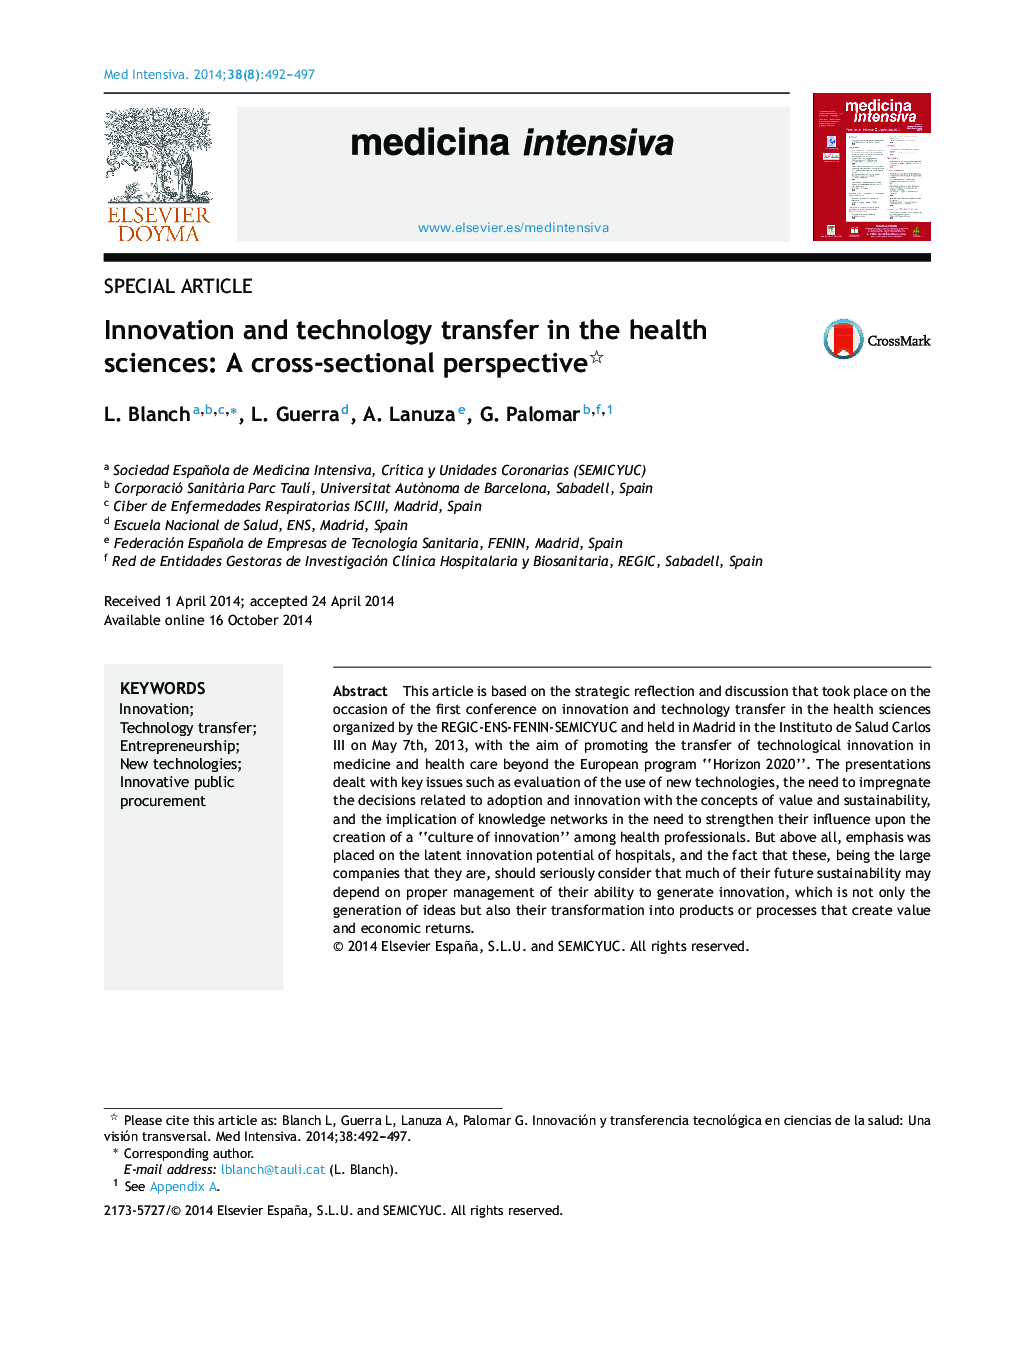 Innovation and technology transfer in the health sciences: A cross-sectional perspective 